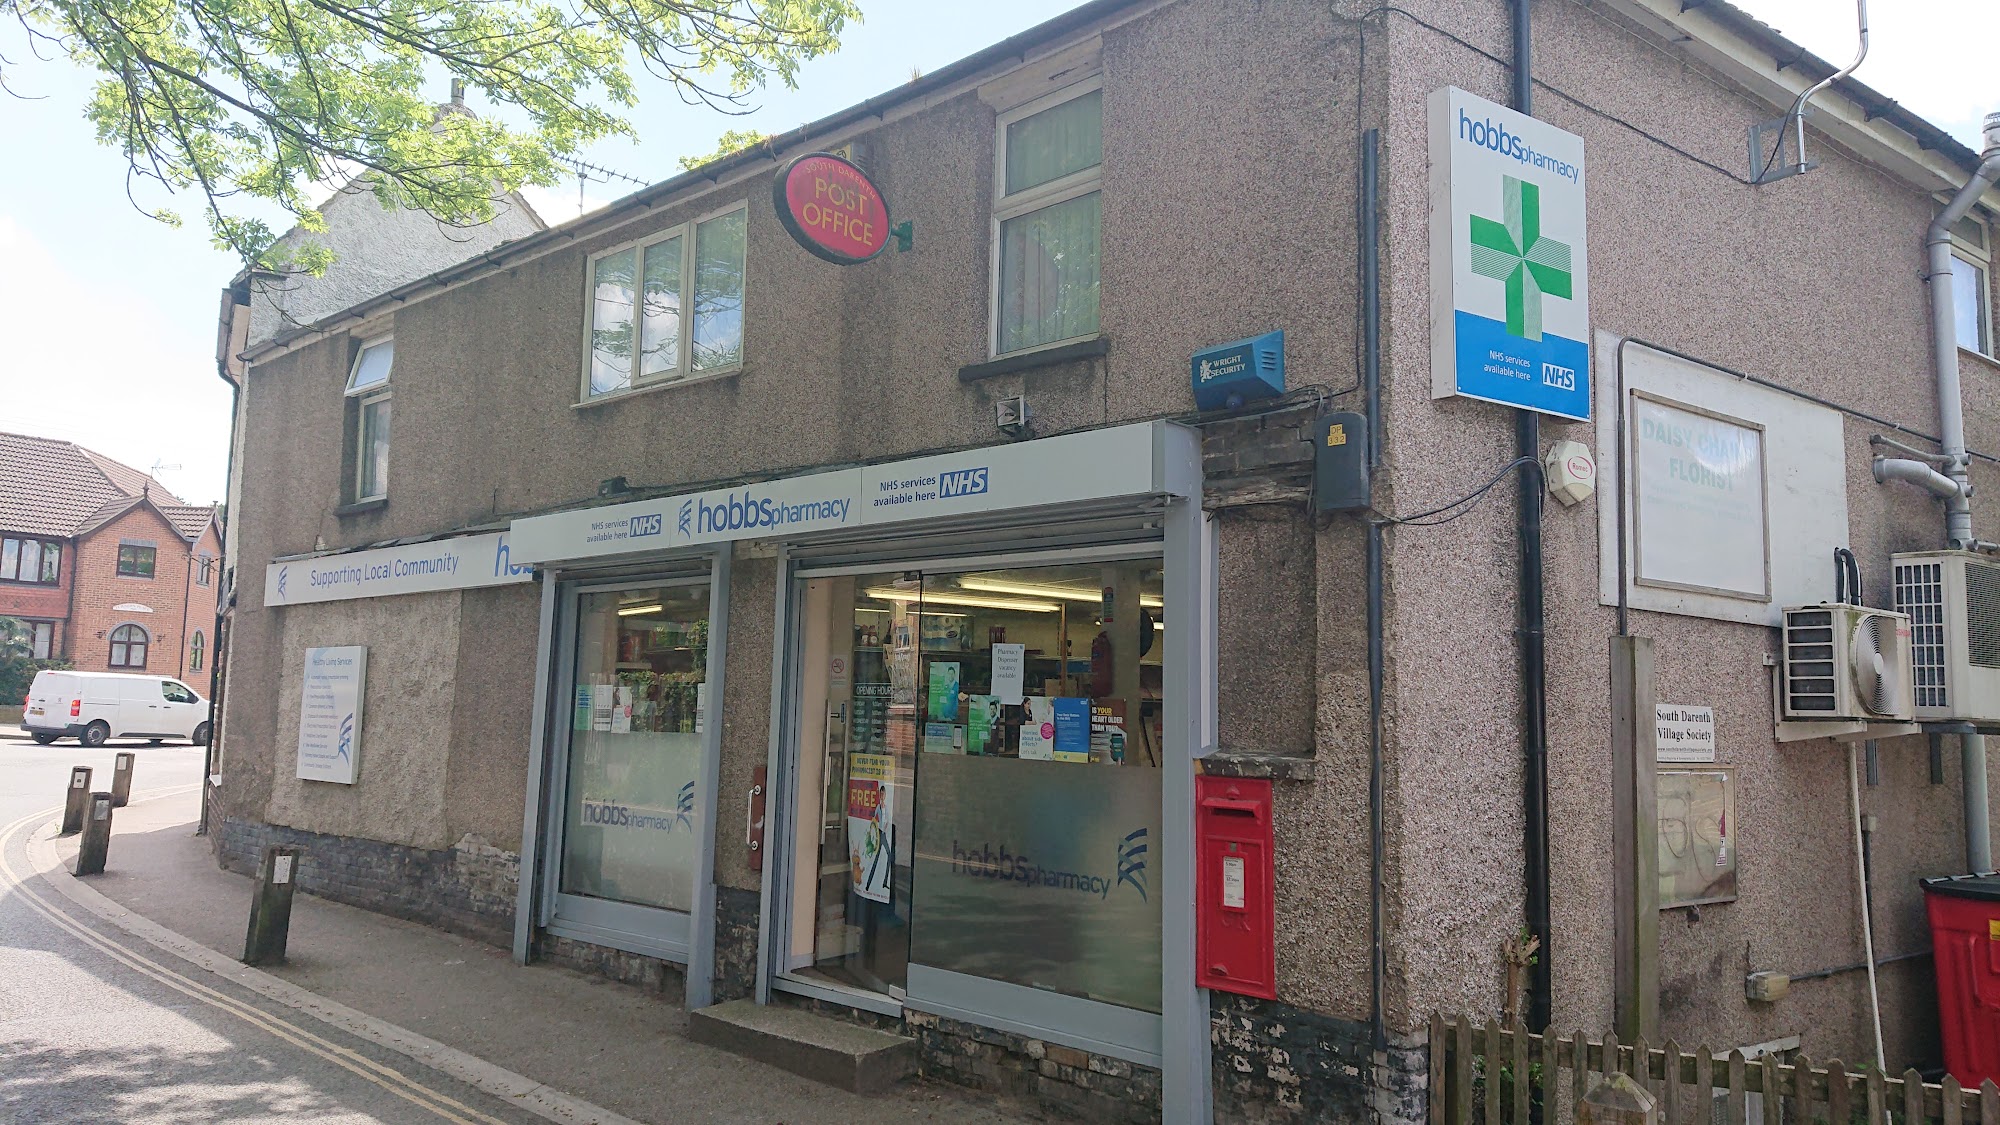 South Darenth Post Office